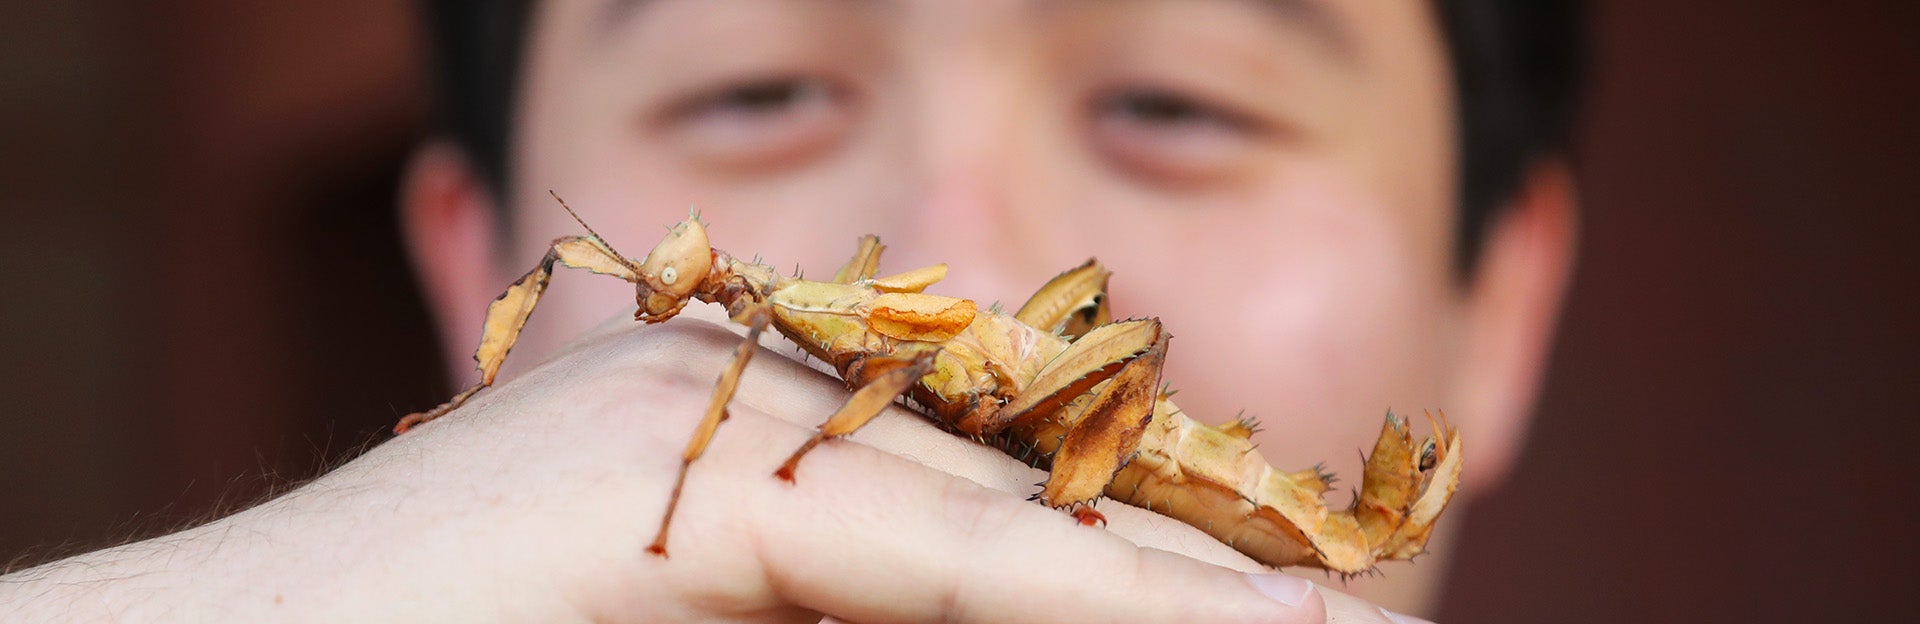 Australian Spiny Leaf insect, Entomology outreach, (c) UCR / Stan Lim 2019